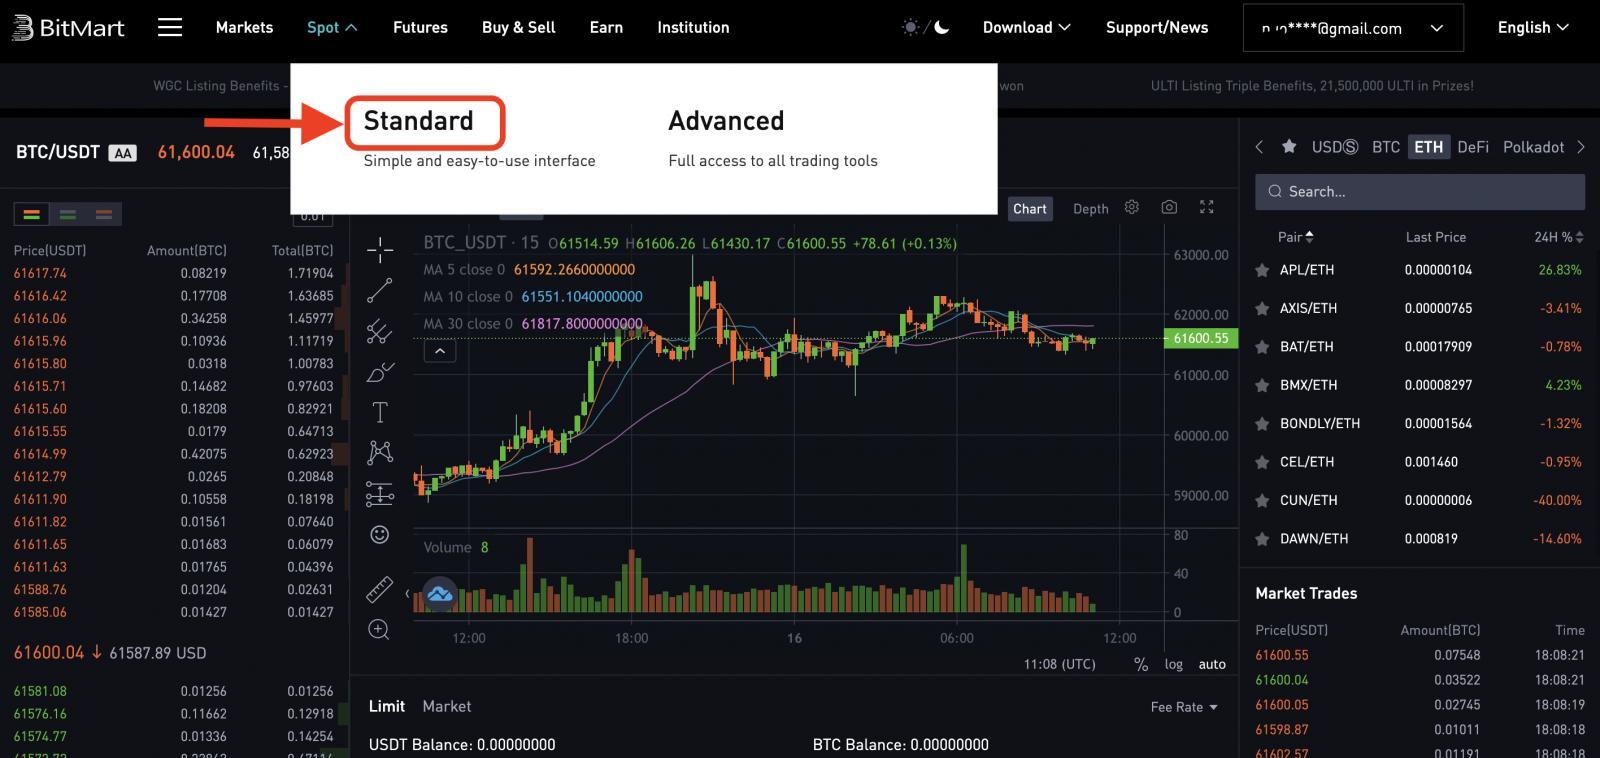 How to Start BitMart Trading in 2021: A Step-By-Step Guide for Beginners